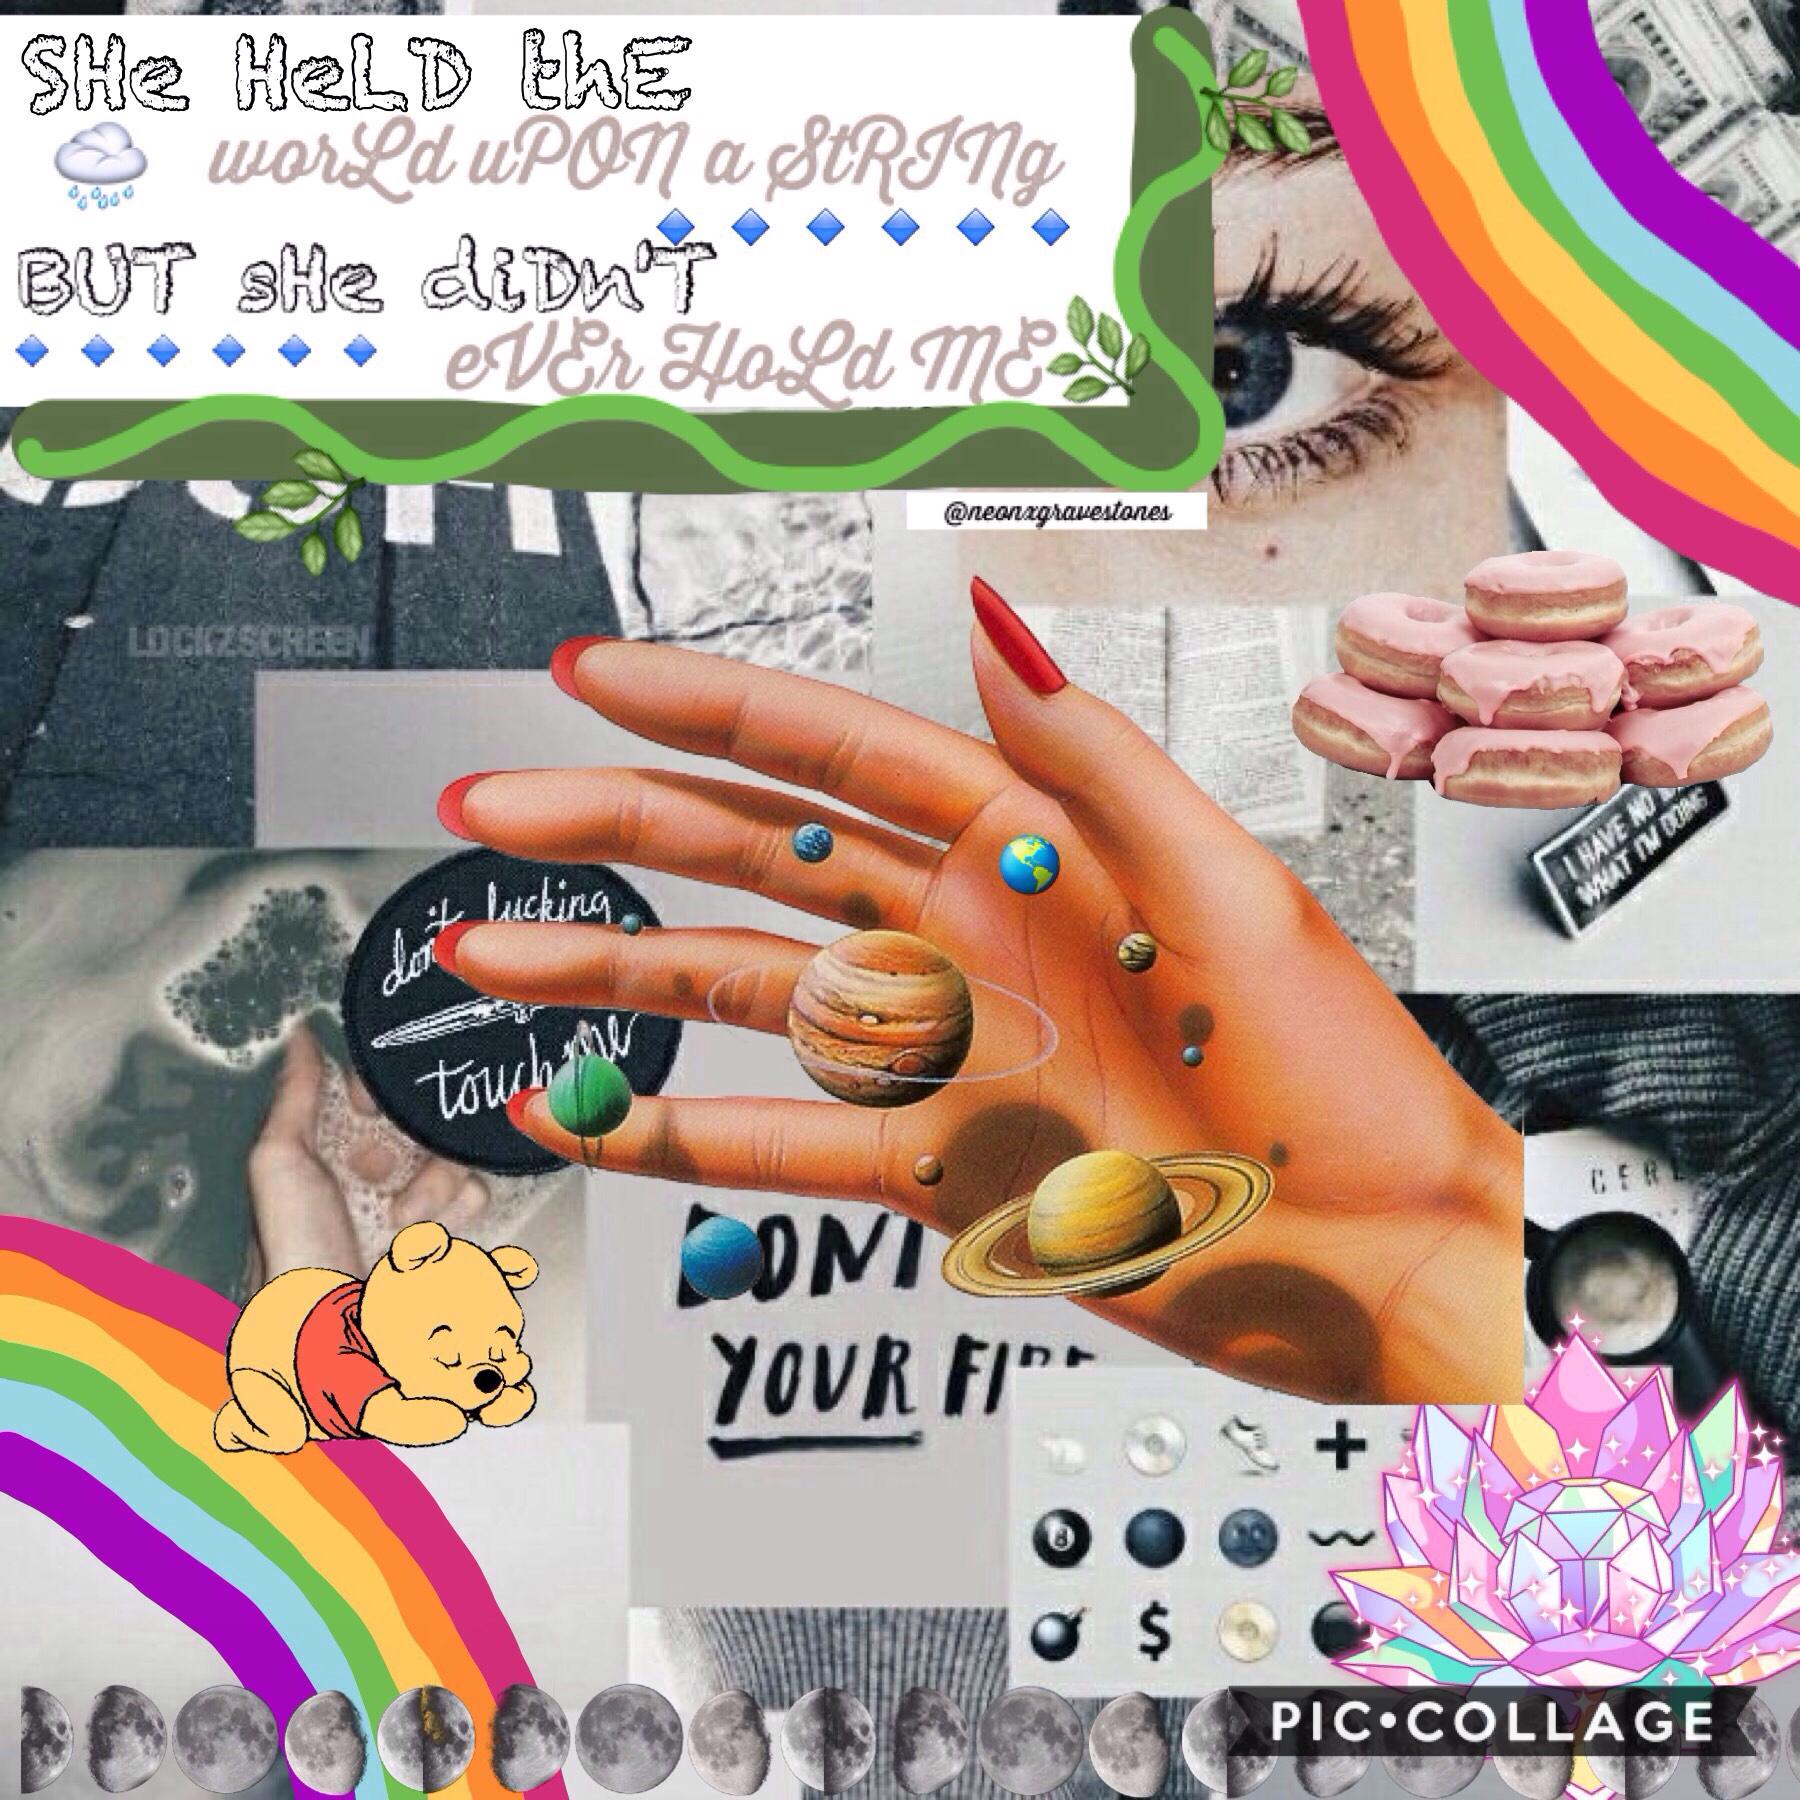 🐣She Had The World: Panic! At The Disco🐣
Happy Easter everyone! I know I did another collage of this song but I decided to that the hand pgn would fit perfect with the song